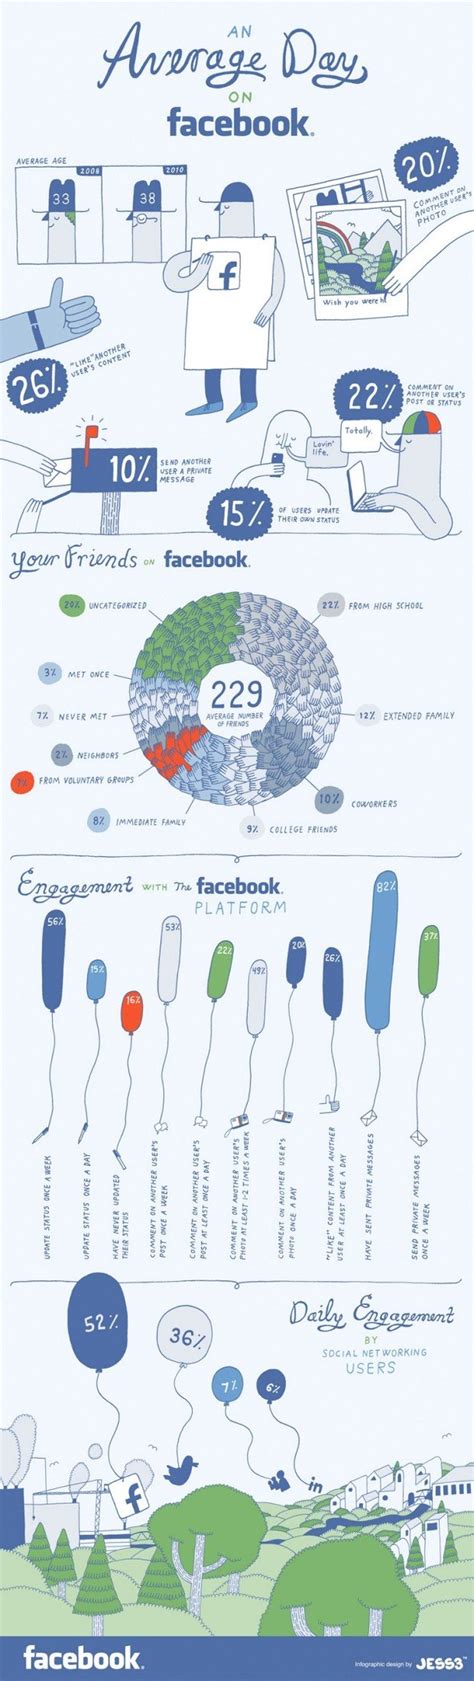 facebook infographic churchmag